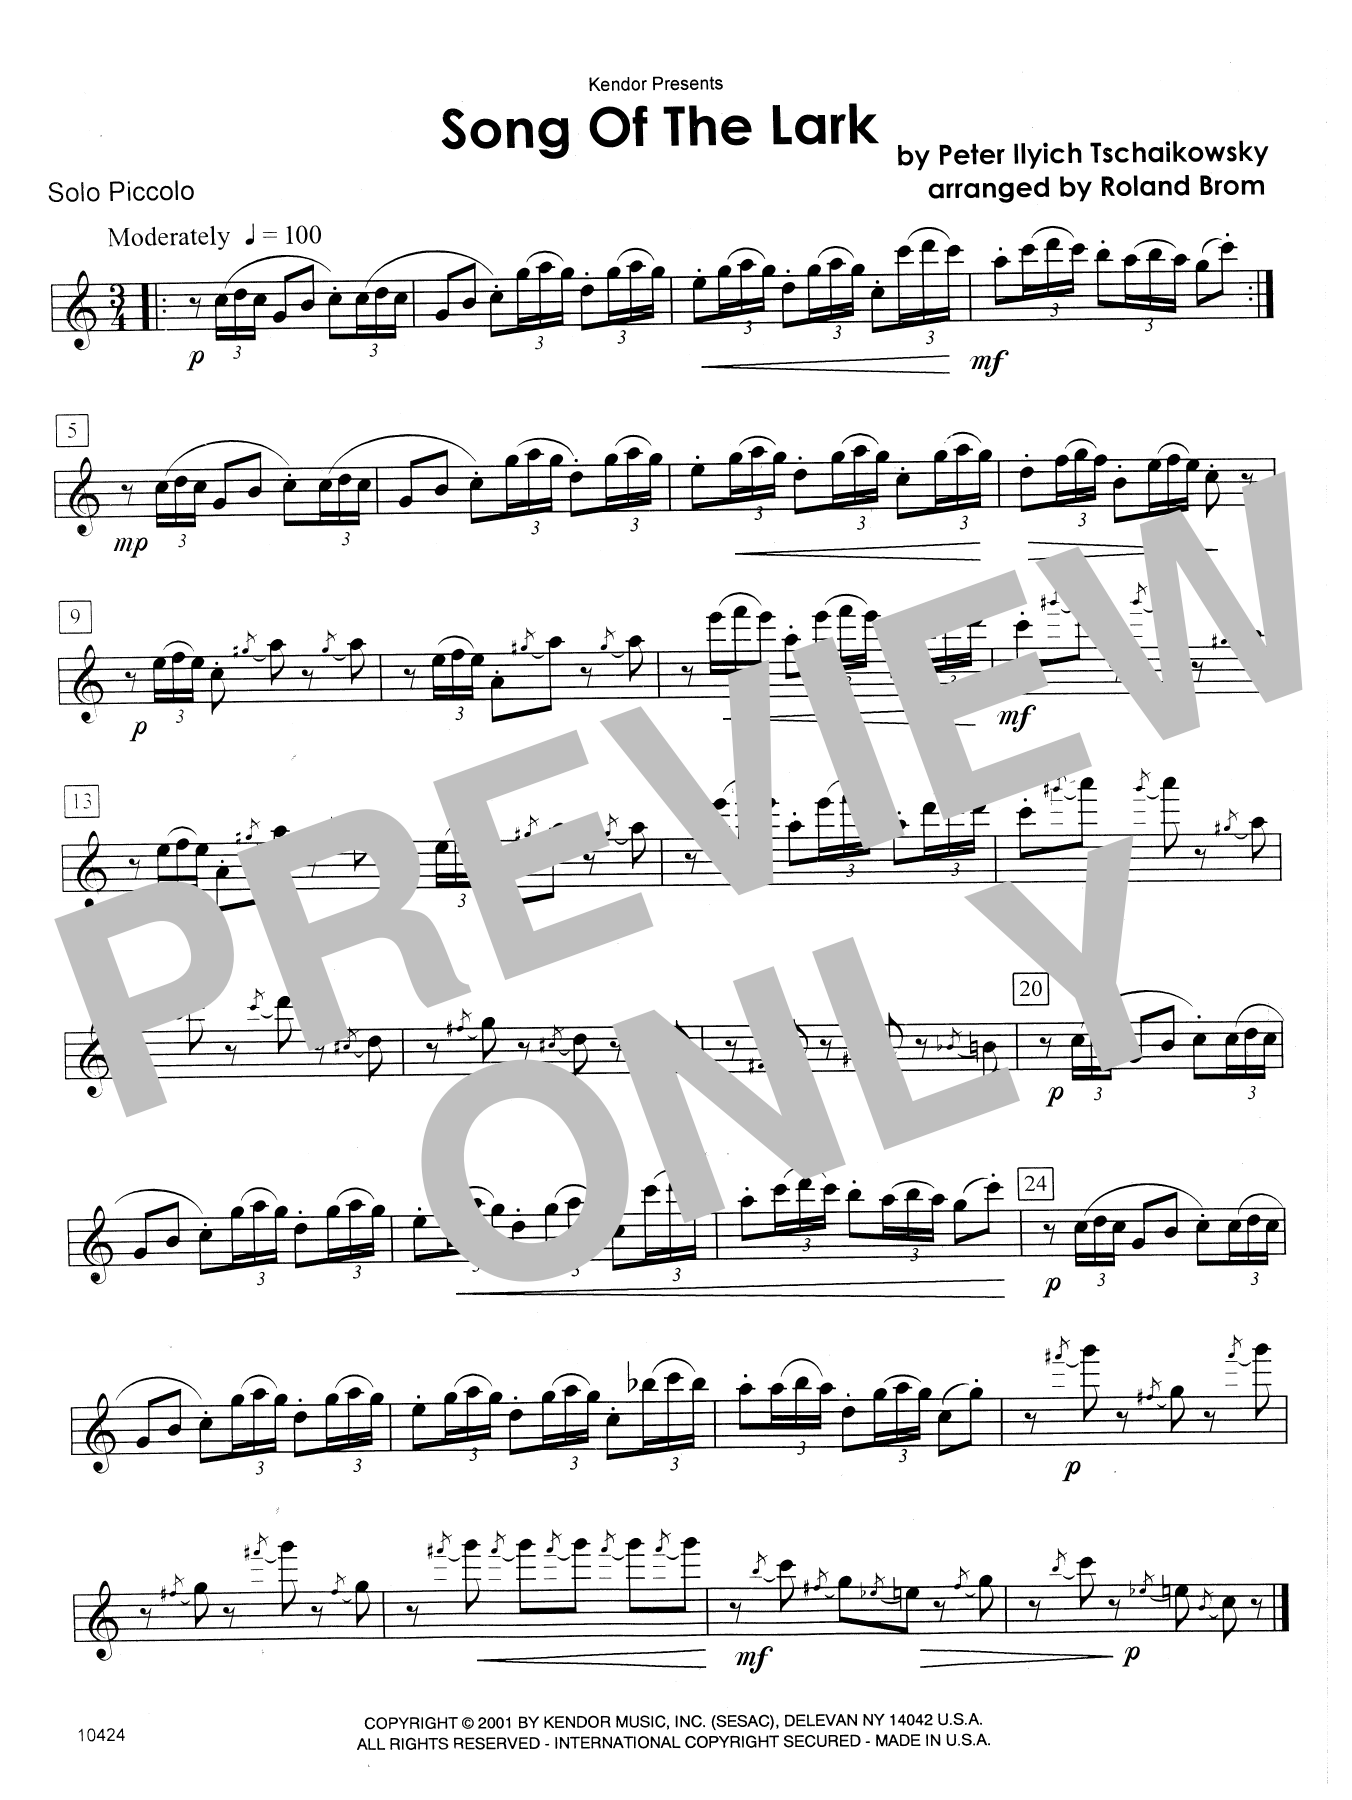 Download Brom Song of the Lark - Solo Piccolo Sheet Music